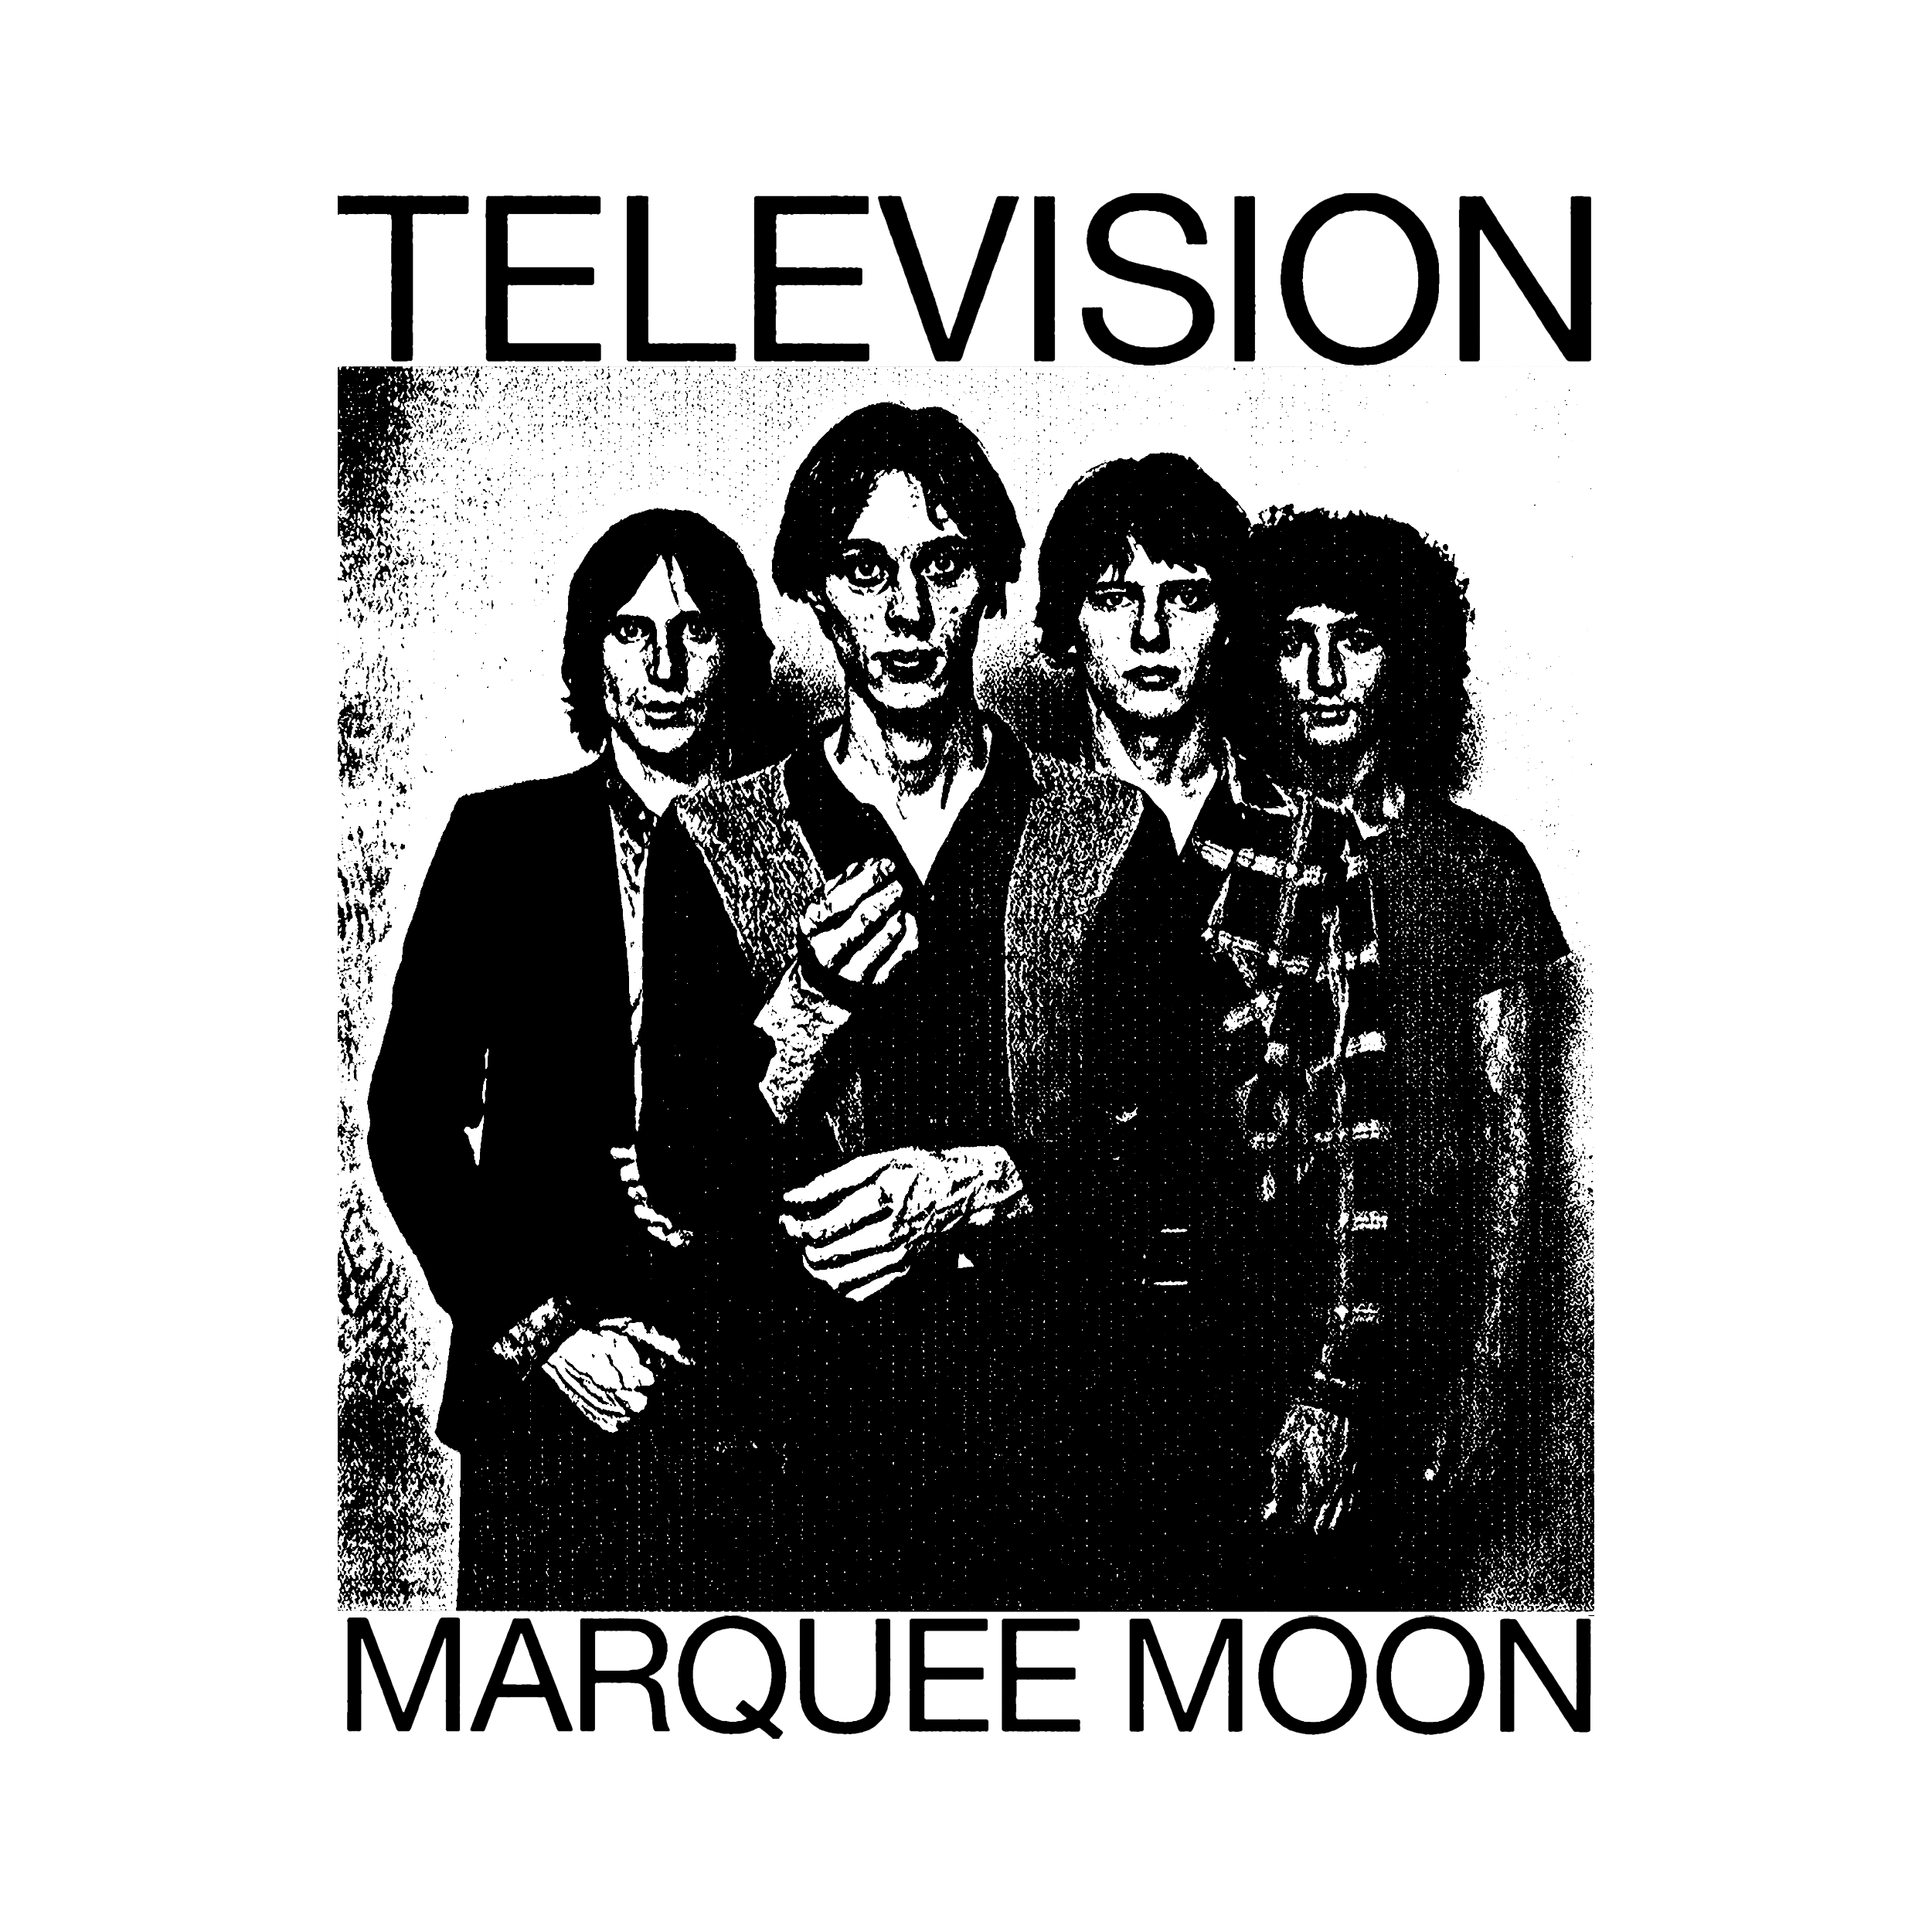 The Story of Television 'Marquee Moon' - Classic Album Sundays